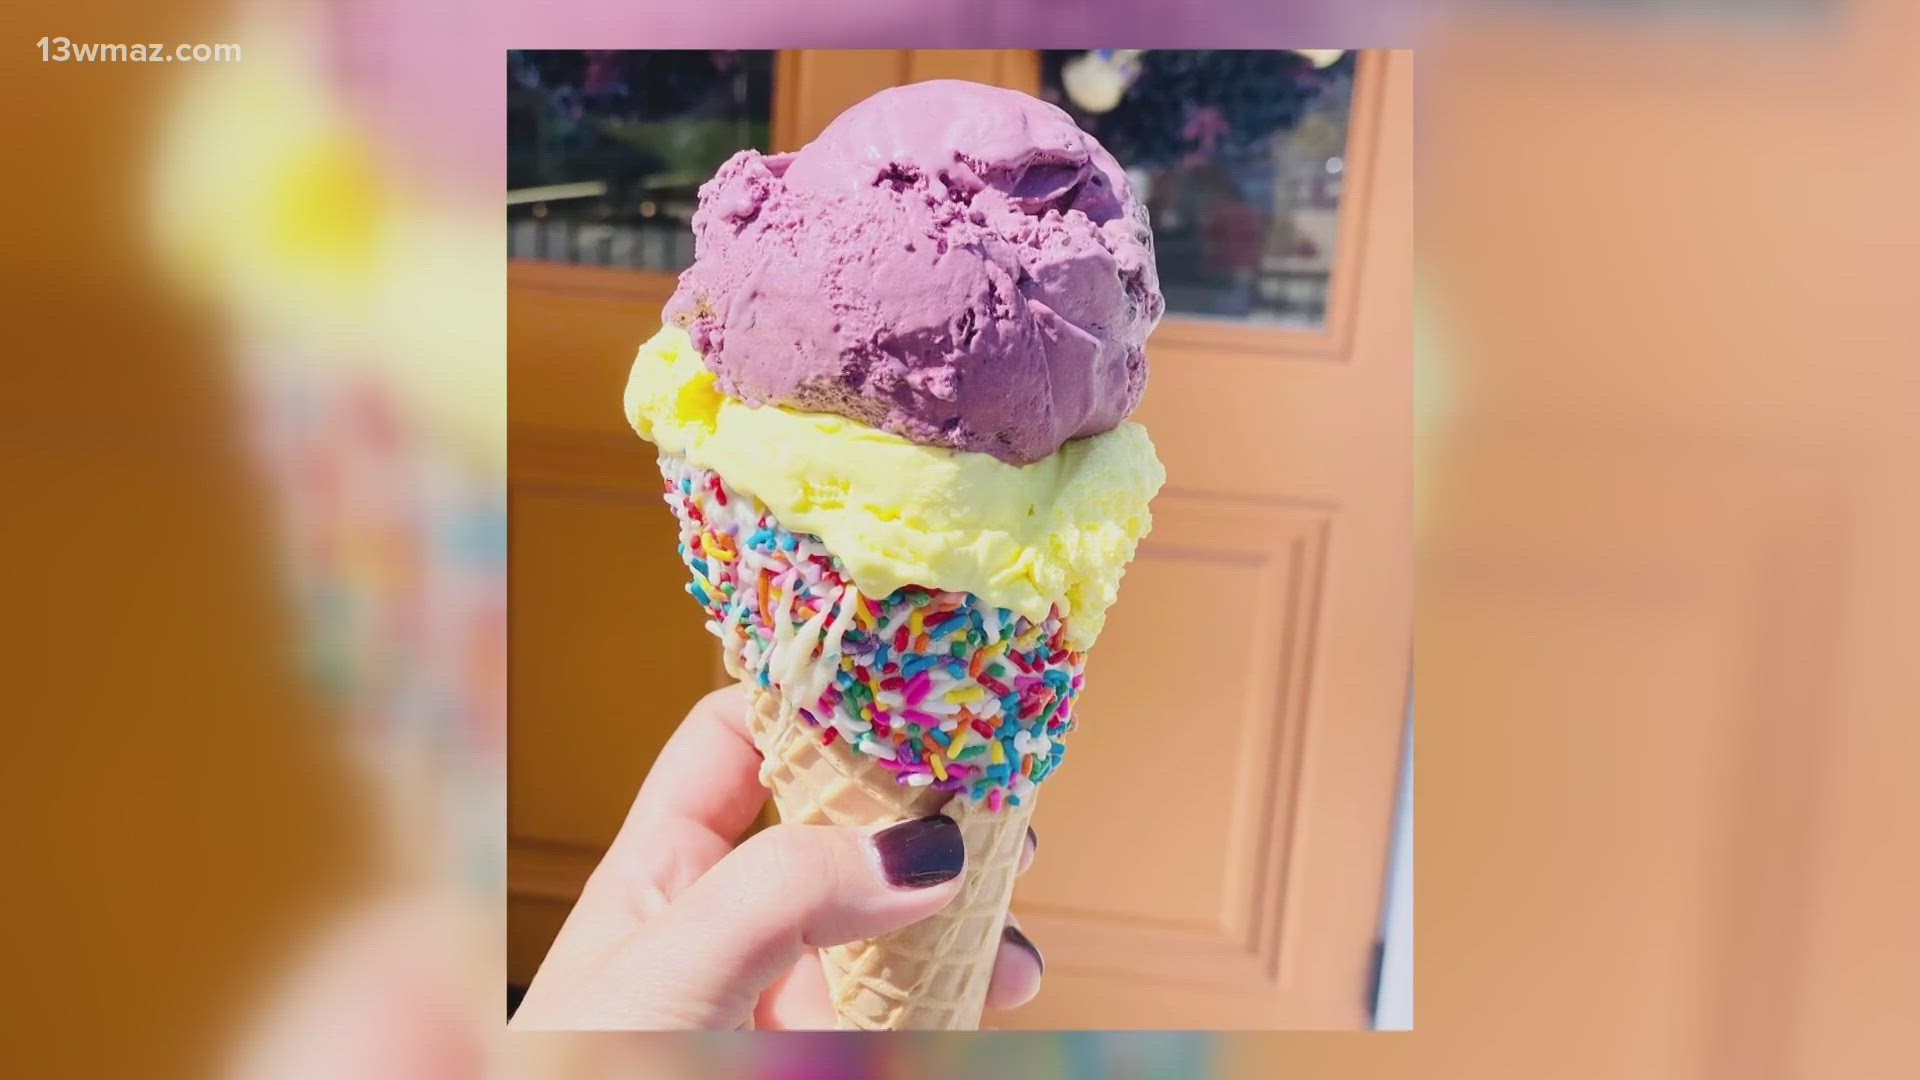 You can beat the heat this summer with some cold treats from several eateries in the area.